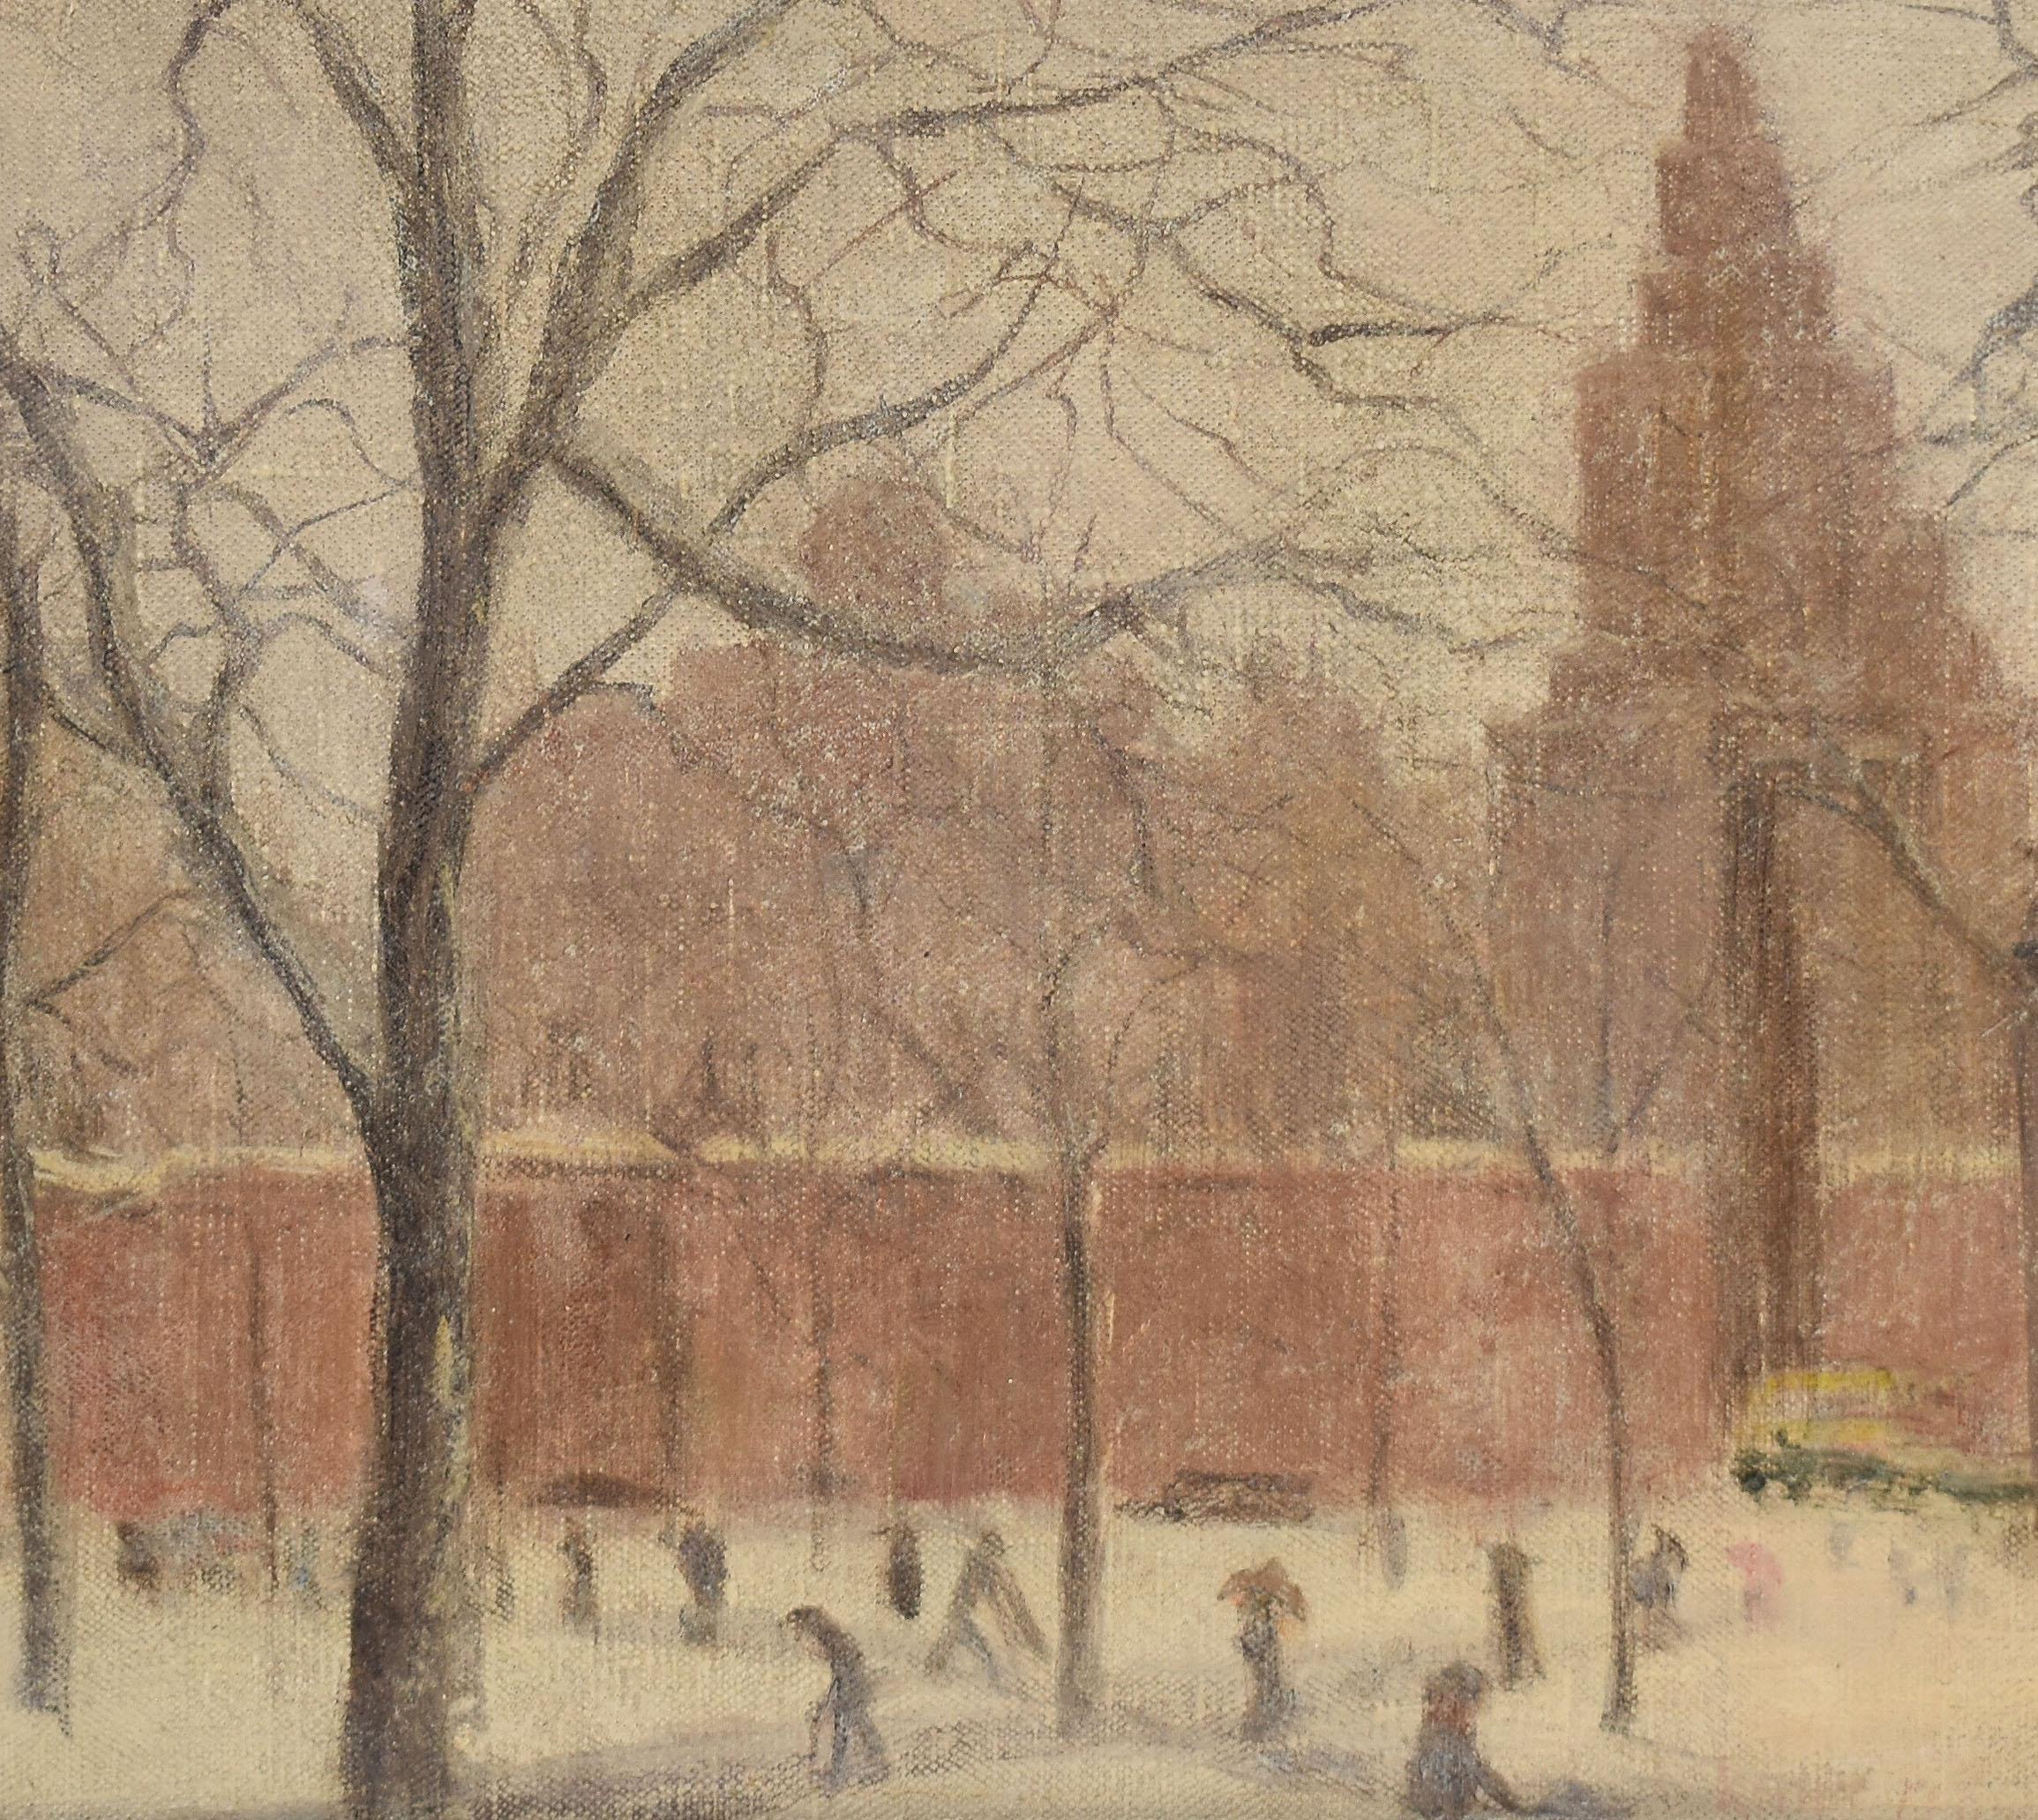 Impressionist winter cityscape painting of New York City's Washington Square Park.  Oil on canvas, circa 1910.  Displayed in a period impressionist frame.  Image size, 14